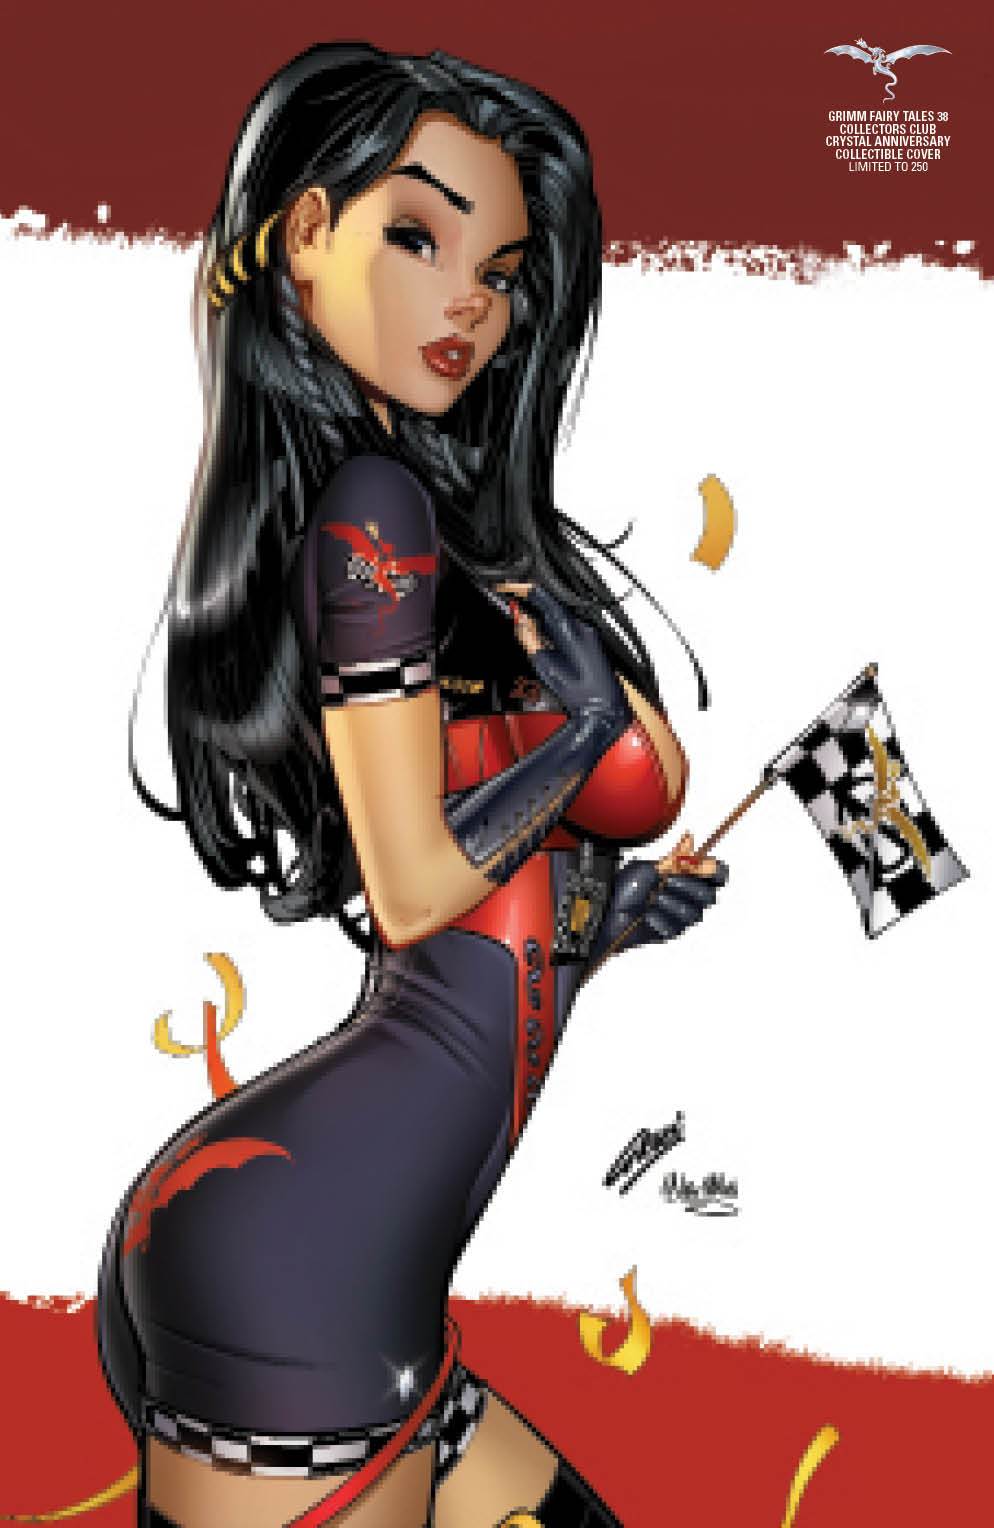 Image of Grimm Fairy Tales: Vol. 2 #38 - Cover K - LE 250